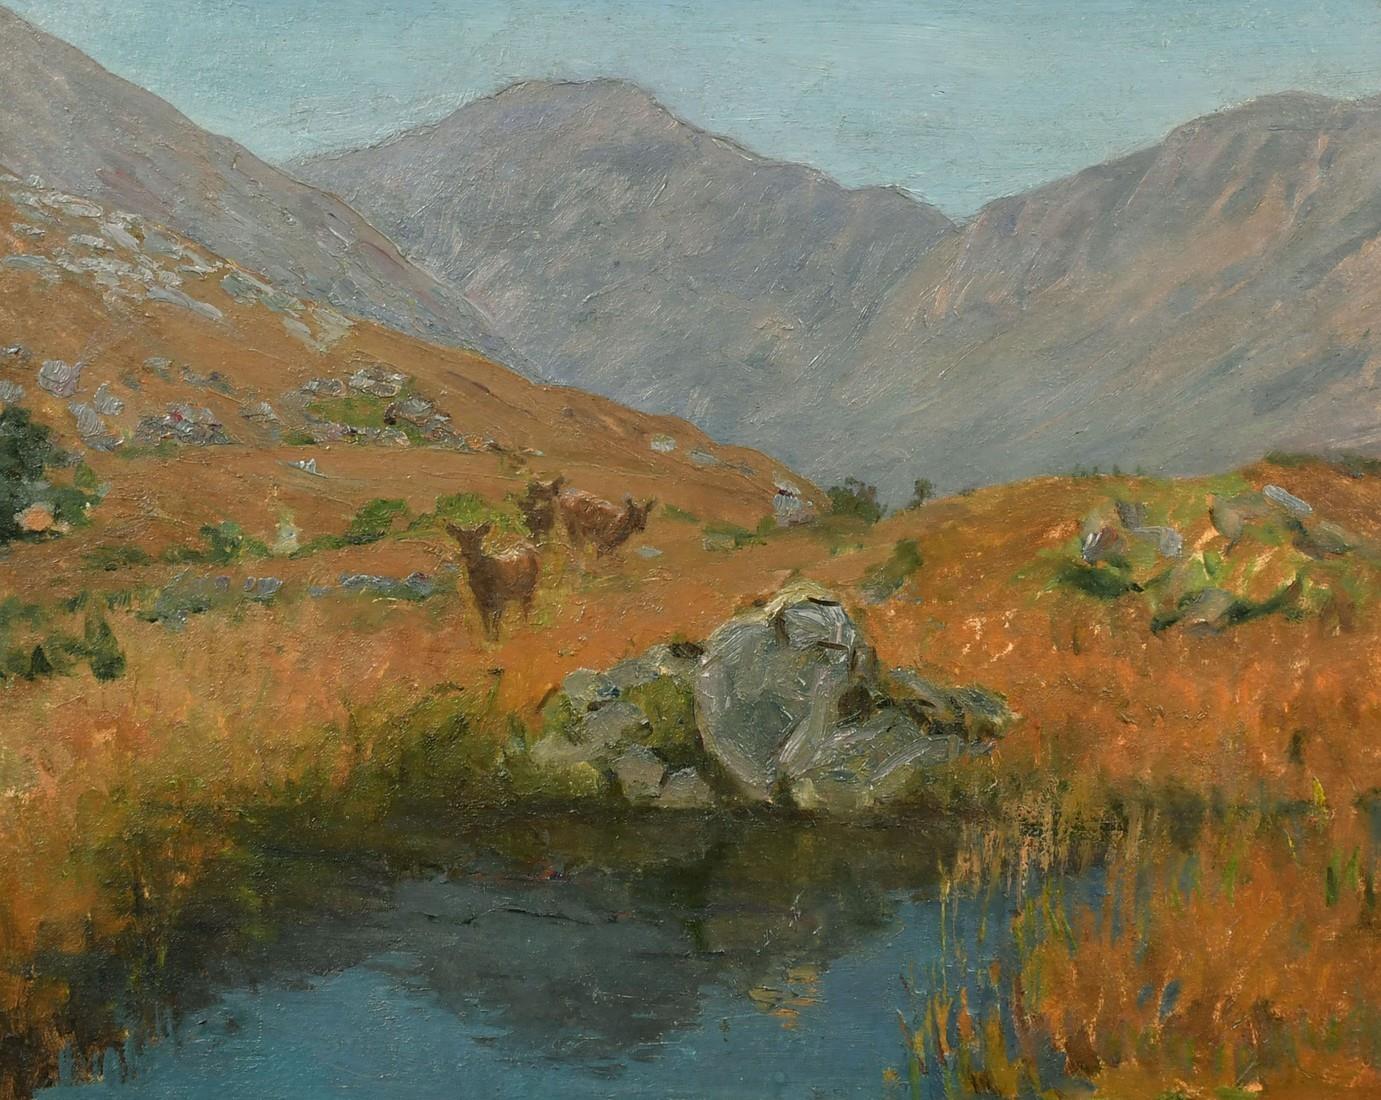 Scottish School Animal Painting - Young Deer in Summer Scottish Highland Glen by Pool of Water